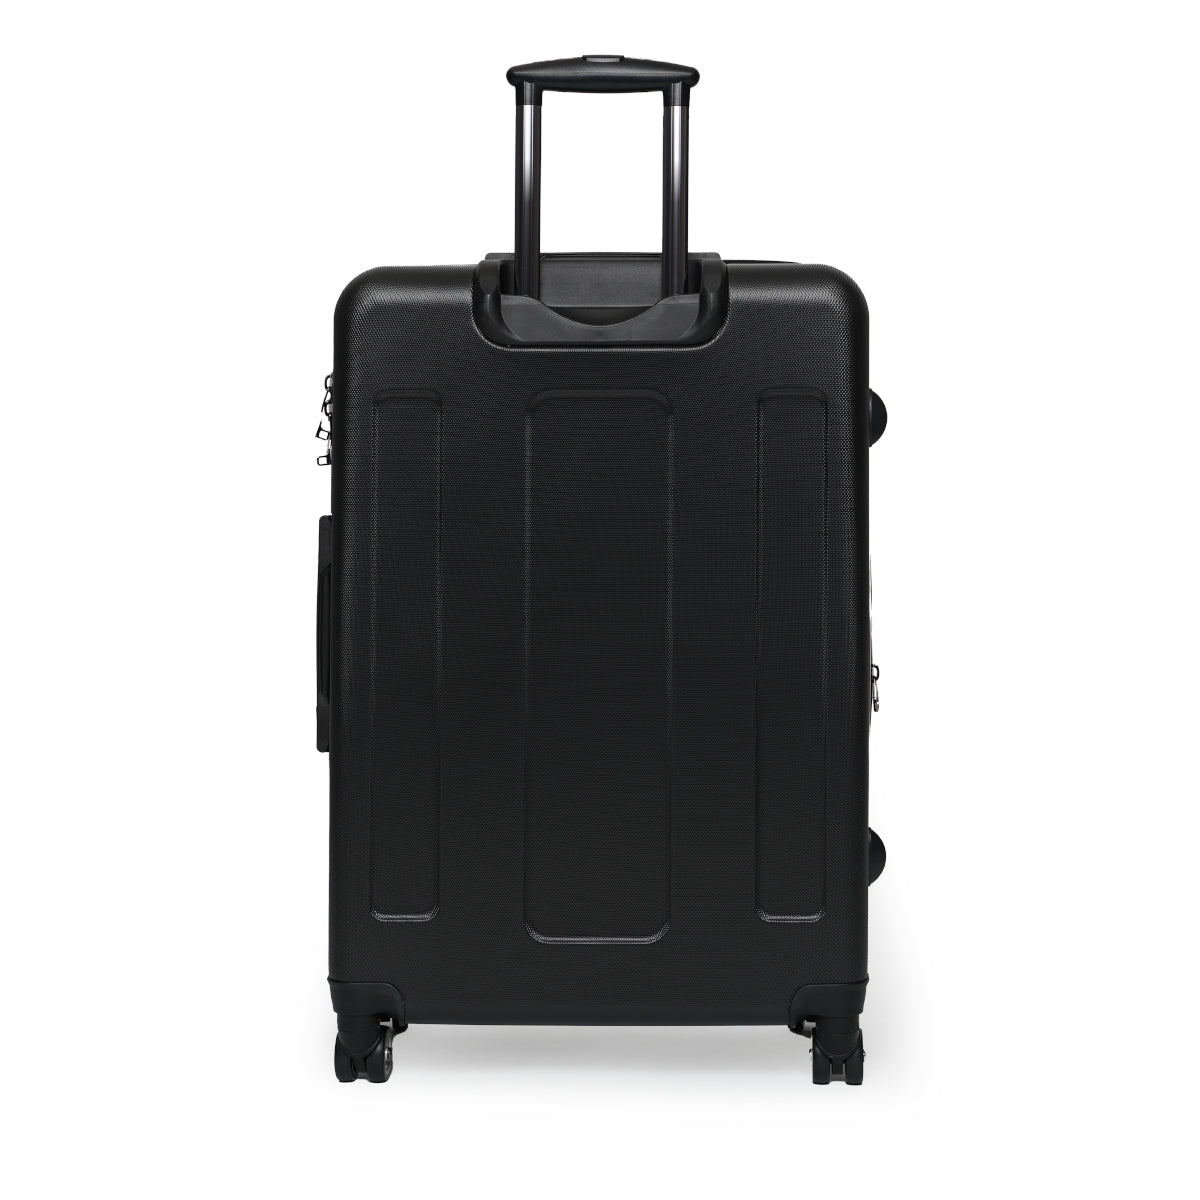 Getrott The Return of the Prodigal Son Rembrandt Black Cabin Suitcase Inner Pockets Extended Storage Adjustable Telescopic Handle Inner Pockets Double wheeled Polycarbonate Hard-shell Built-in Lock